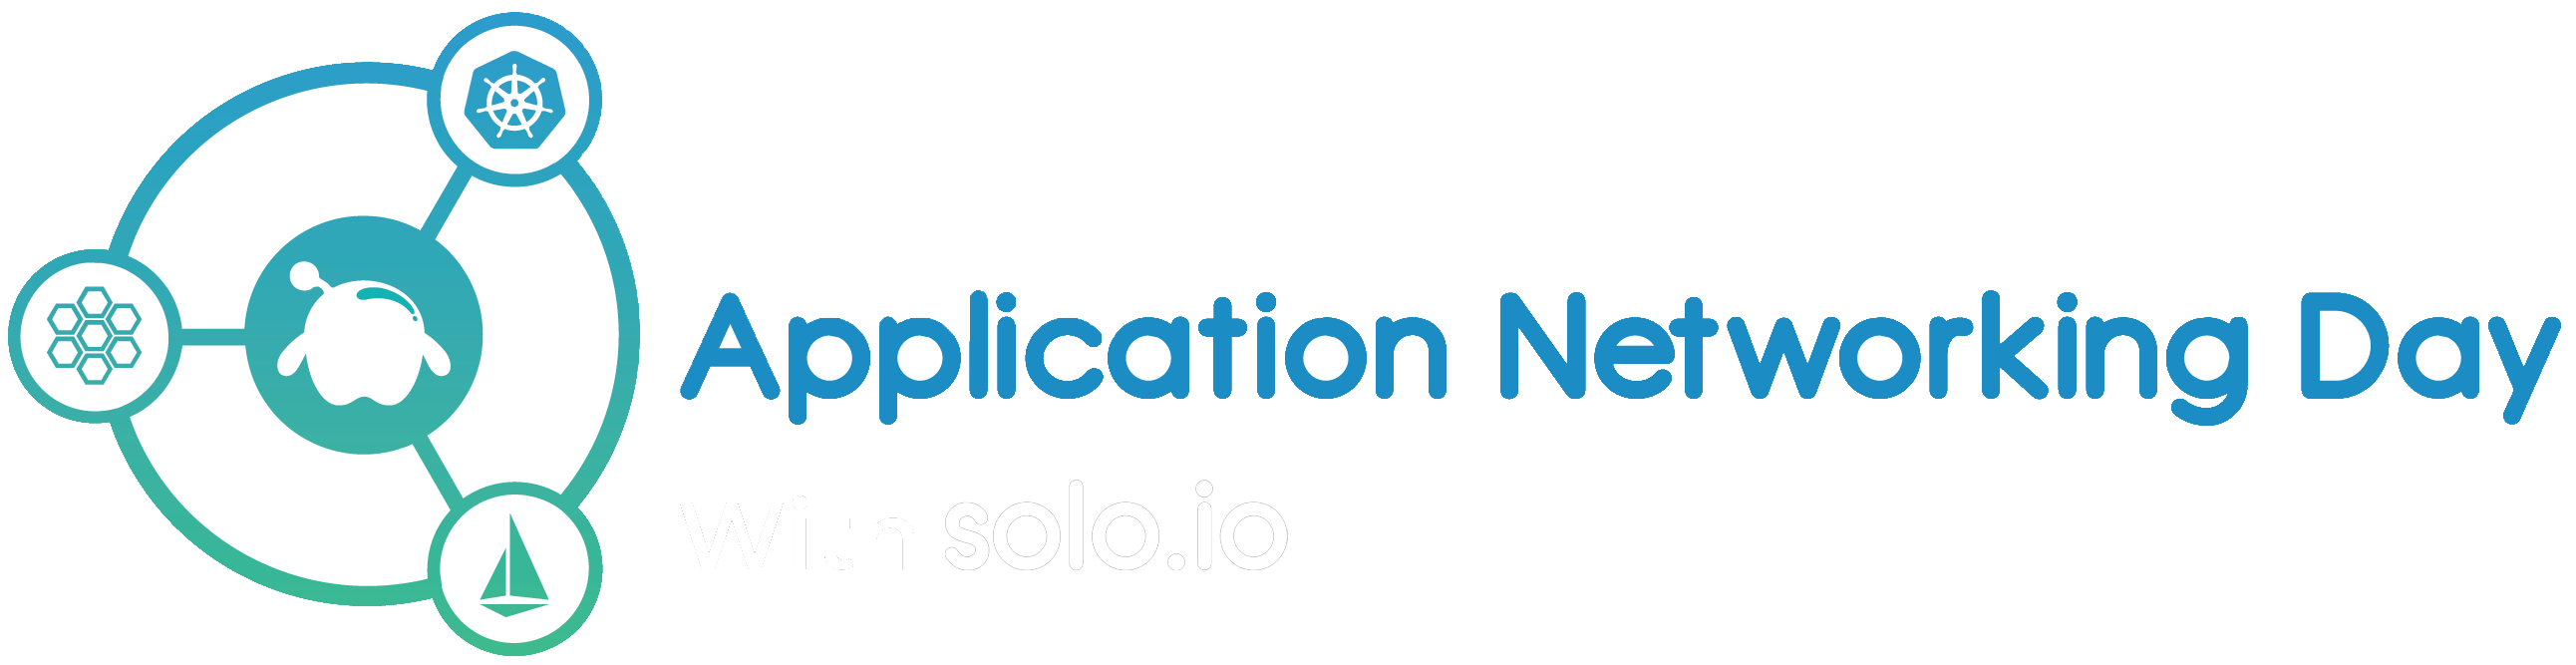 Solo_Application_Networking_Day_Logo_CMYK_OUTLINES_WHITE copy.png